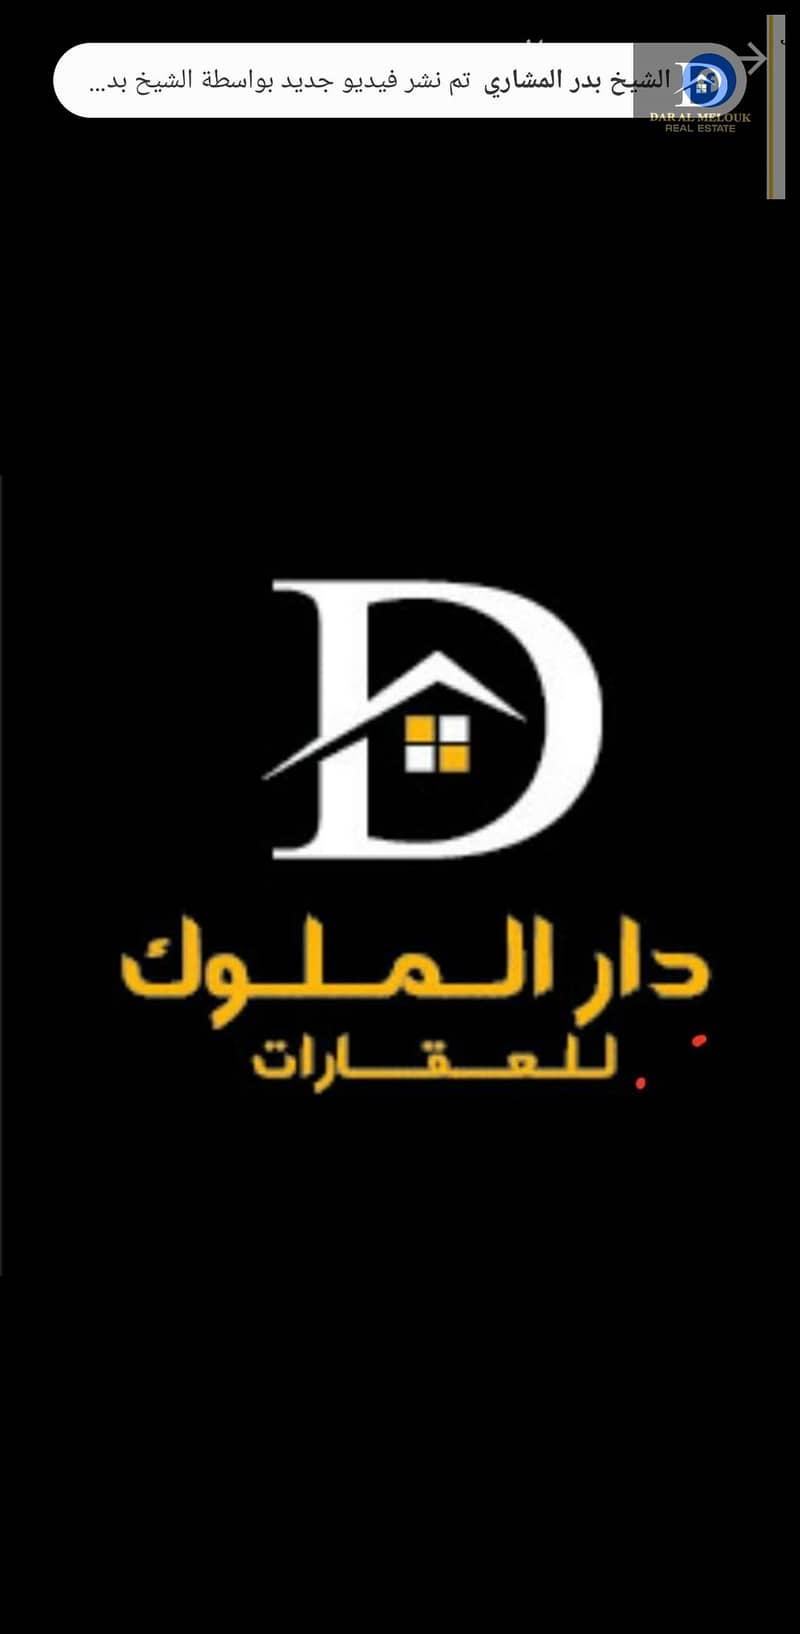 For sale in Sharjah, Al-Hoshi area, residential villa, area of ​​10,000 square feet, ground and first permit, consisting of the first floor, a bedroom, a hall, a sitting room, a kitchen, and a maid’s room, and the second floor has 4 bedrooms and a hall. A